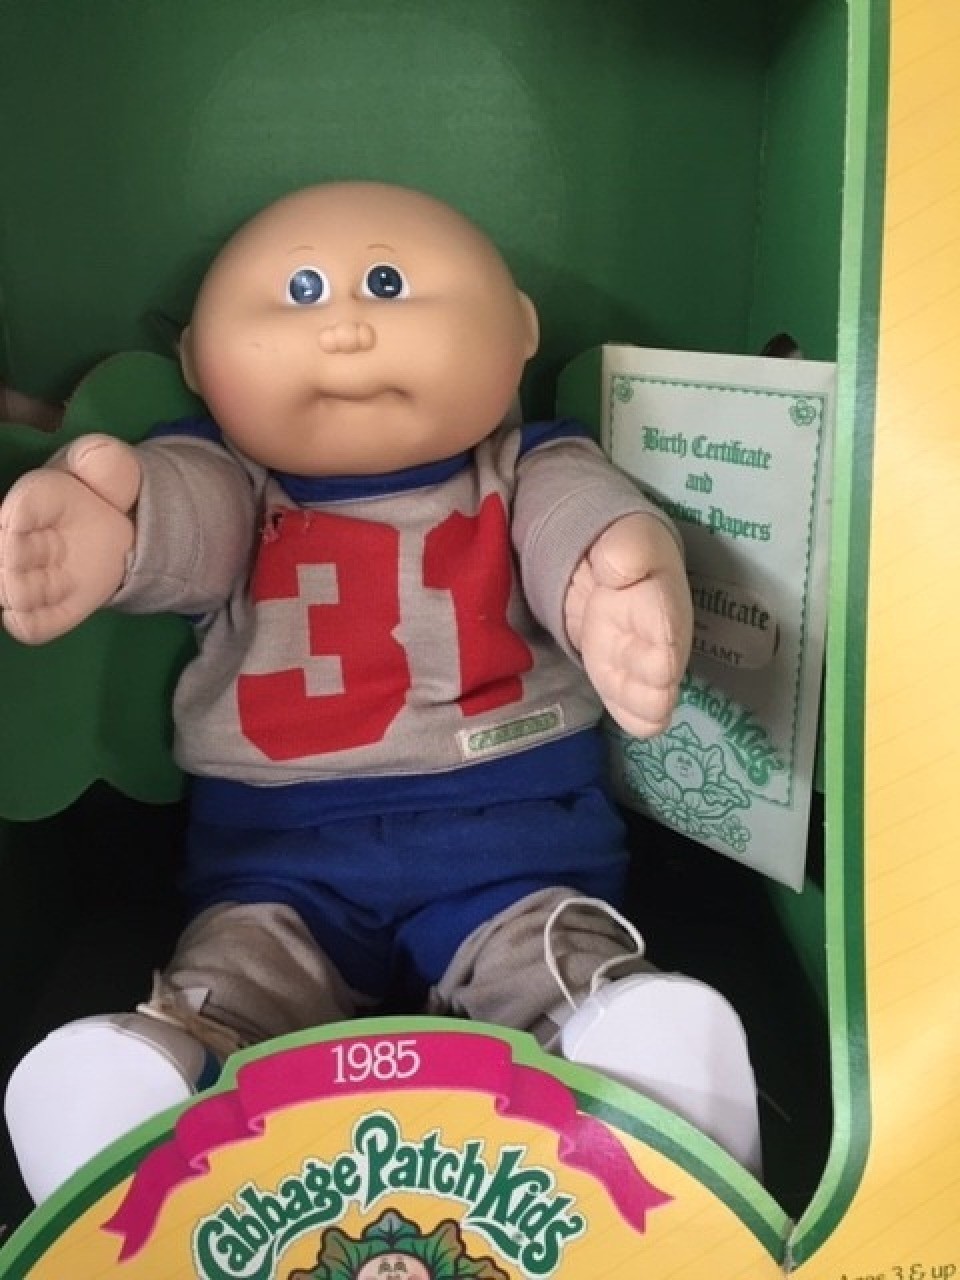 cabbage patch doll in box